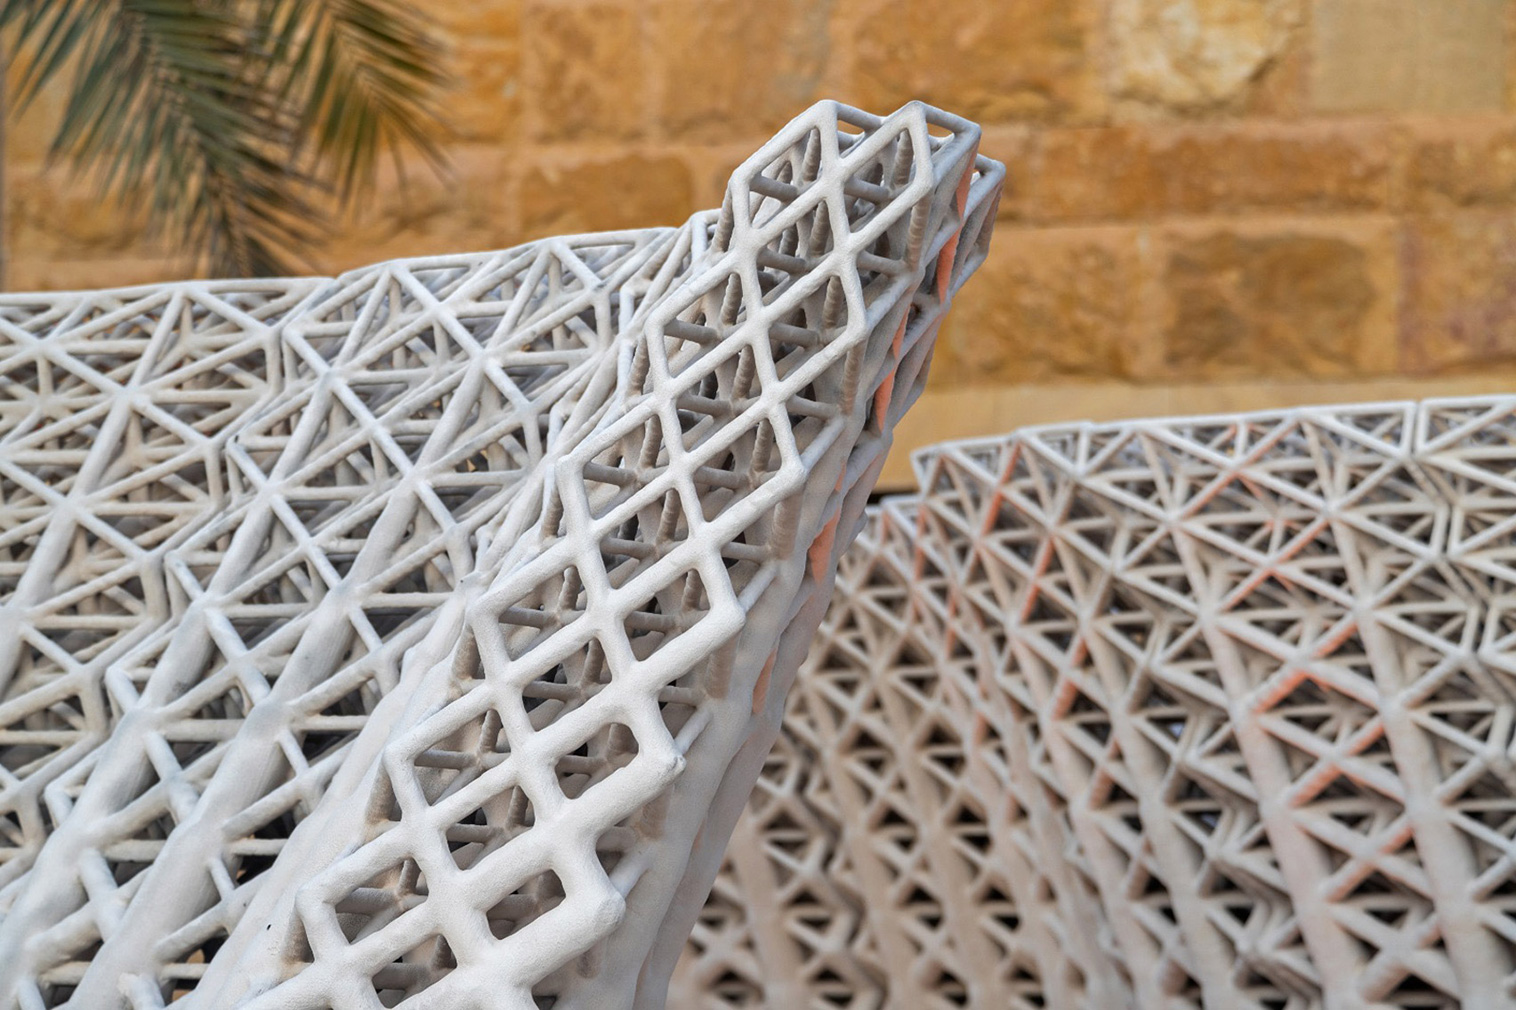 This sustainable street furniture is 3D-printed using sand